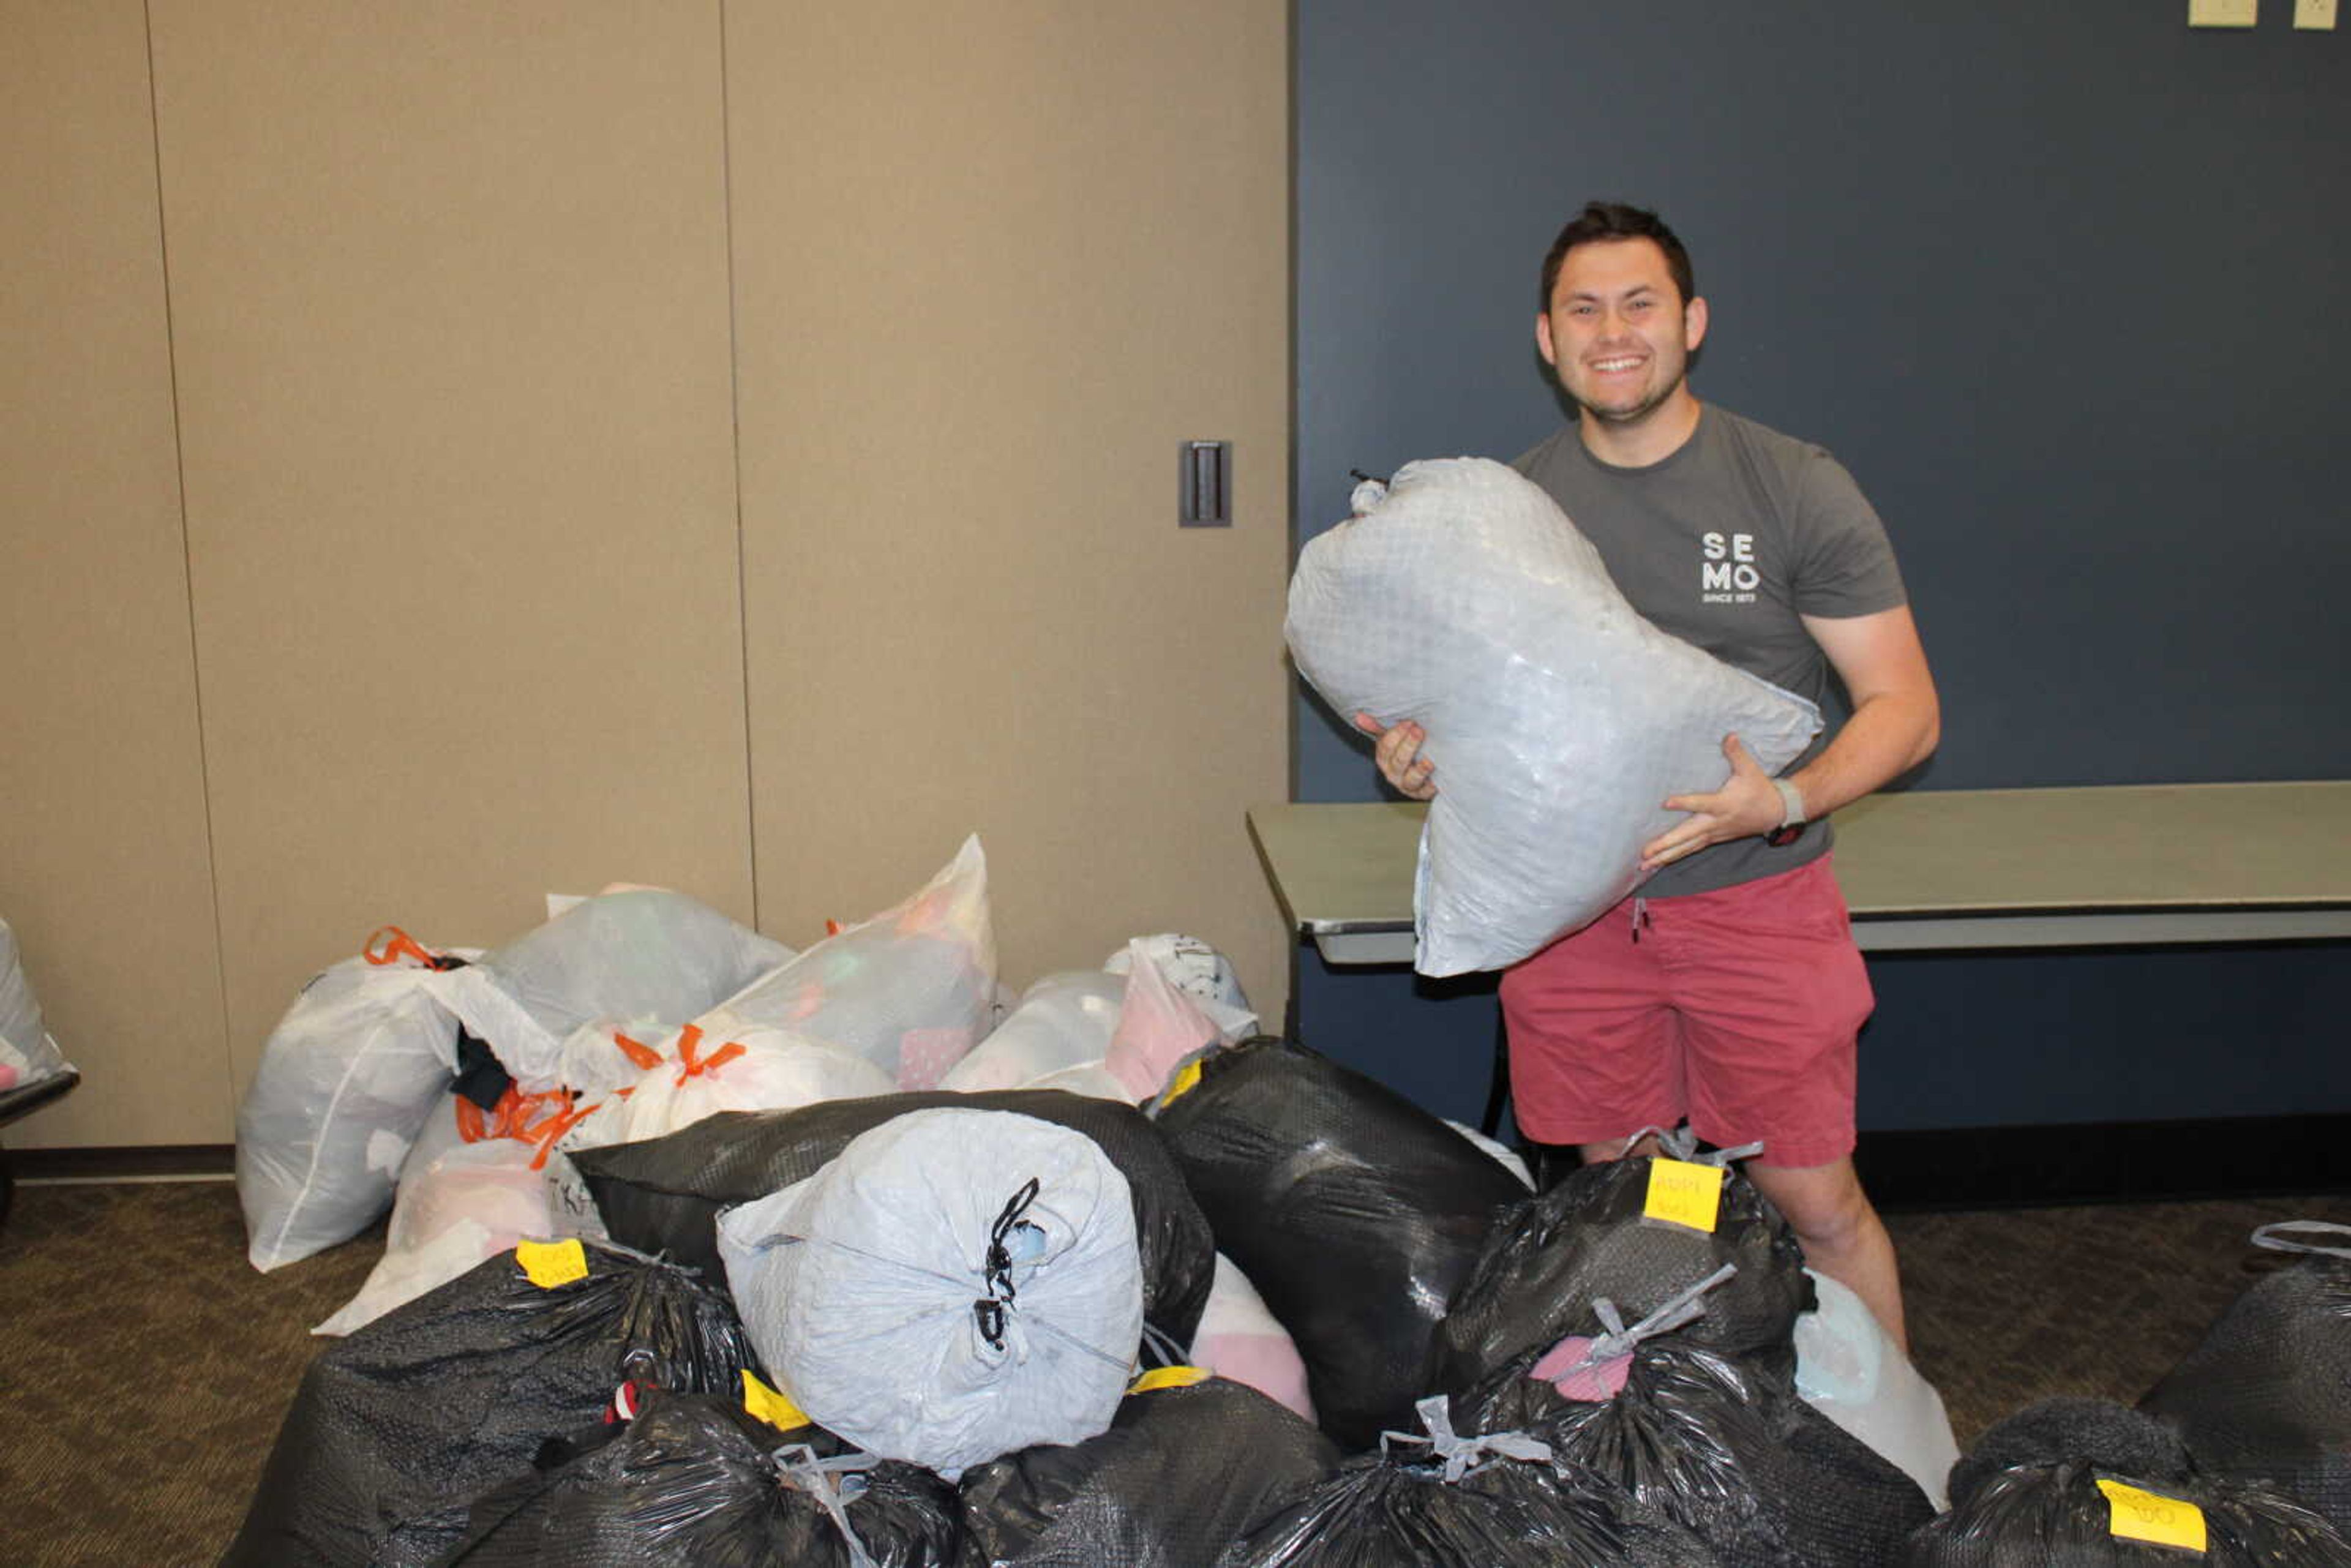 Sophomore social studies education major Frankie Kulavic is the philanthropy chair for this year's Greek Week. Kulavic stands with bags of clothes collected for the clothing drive.